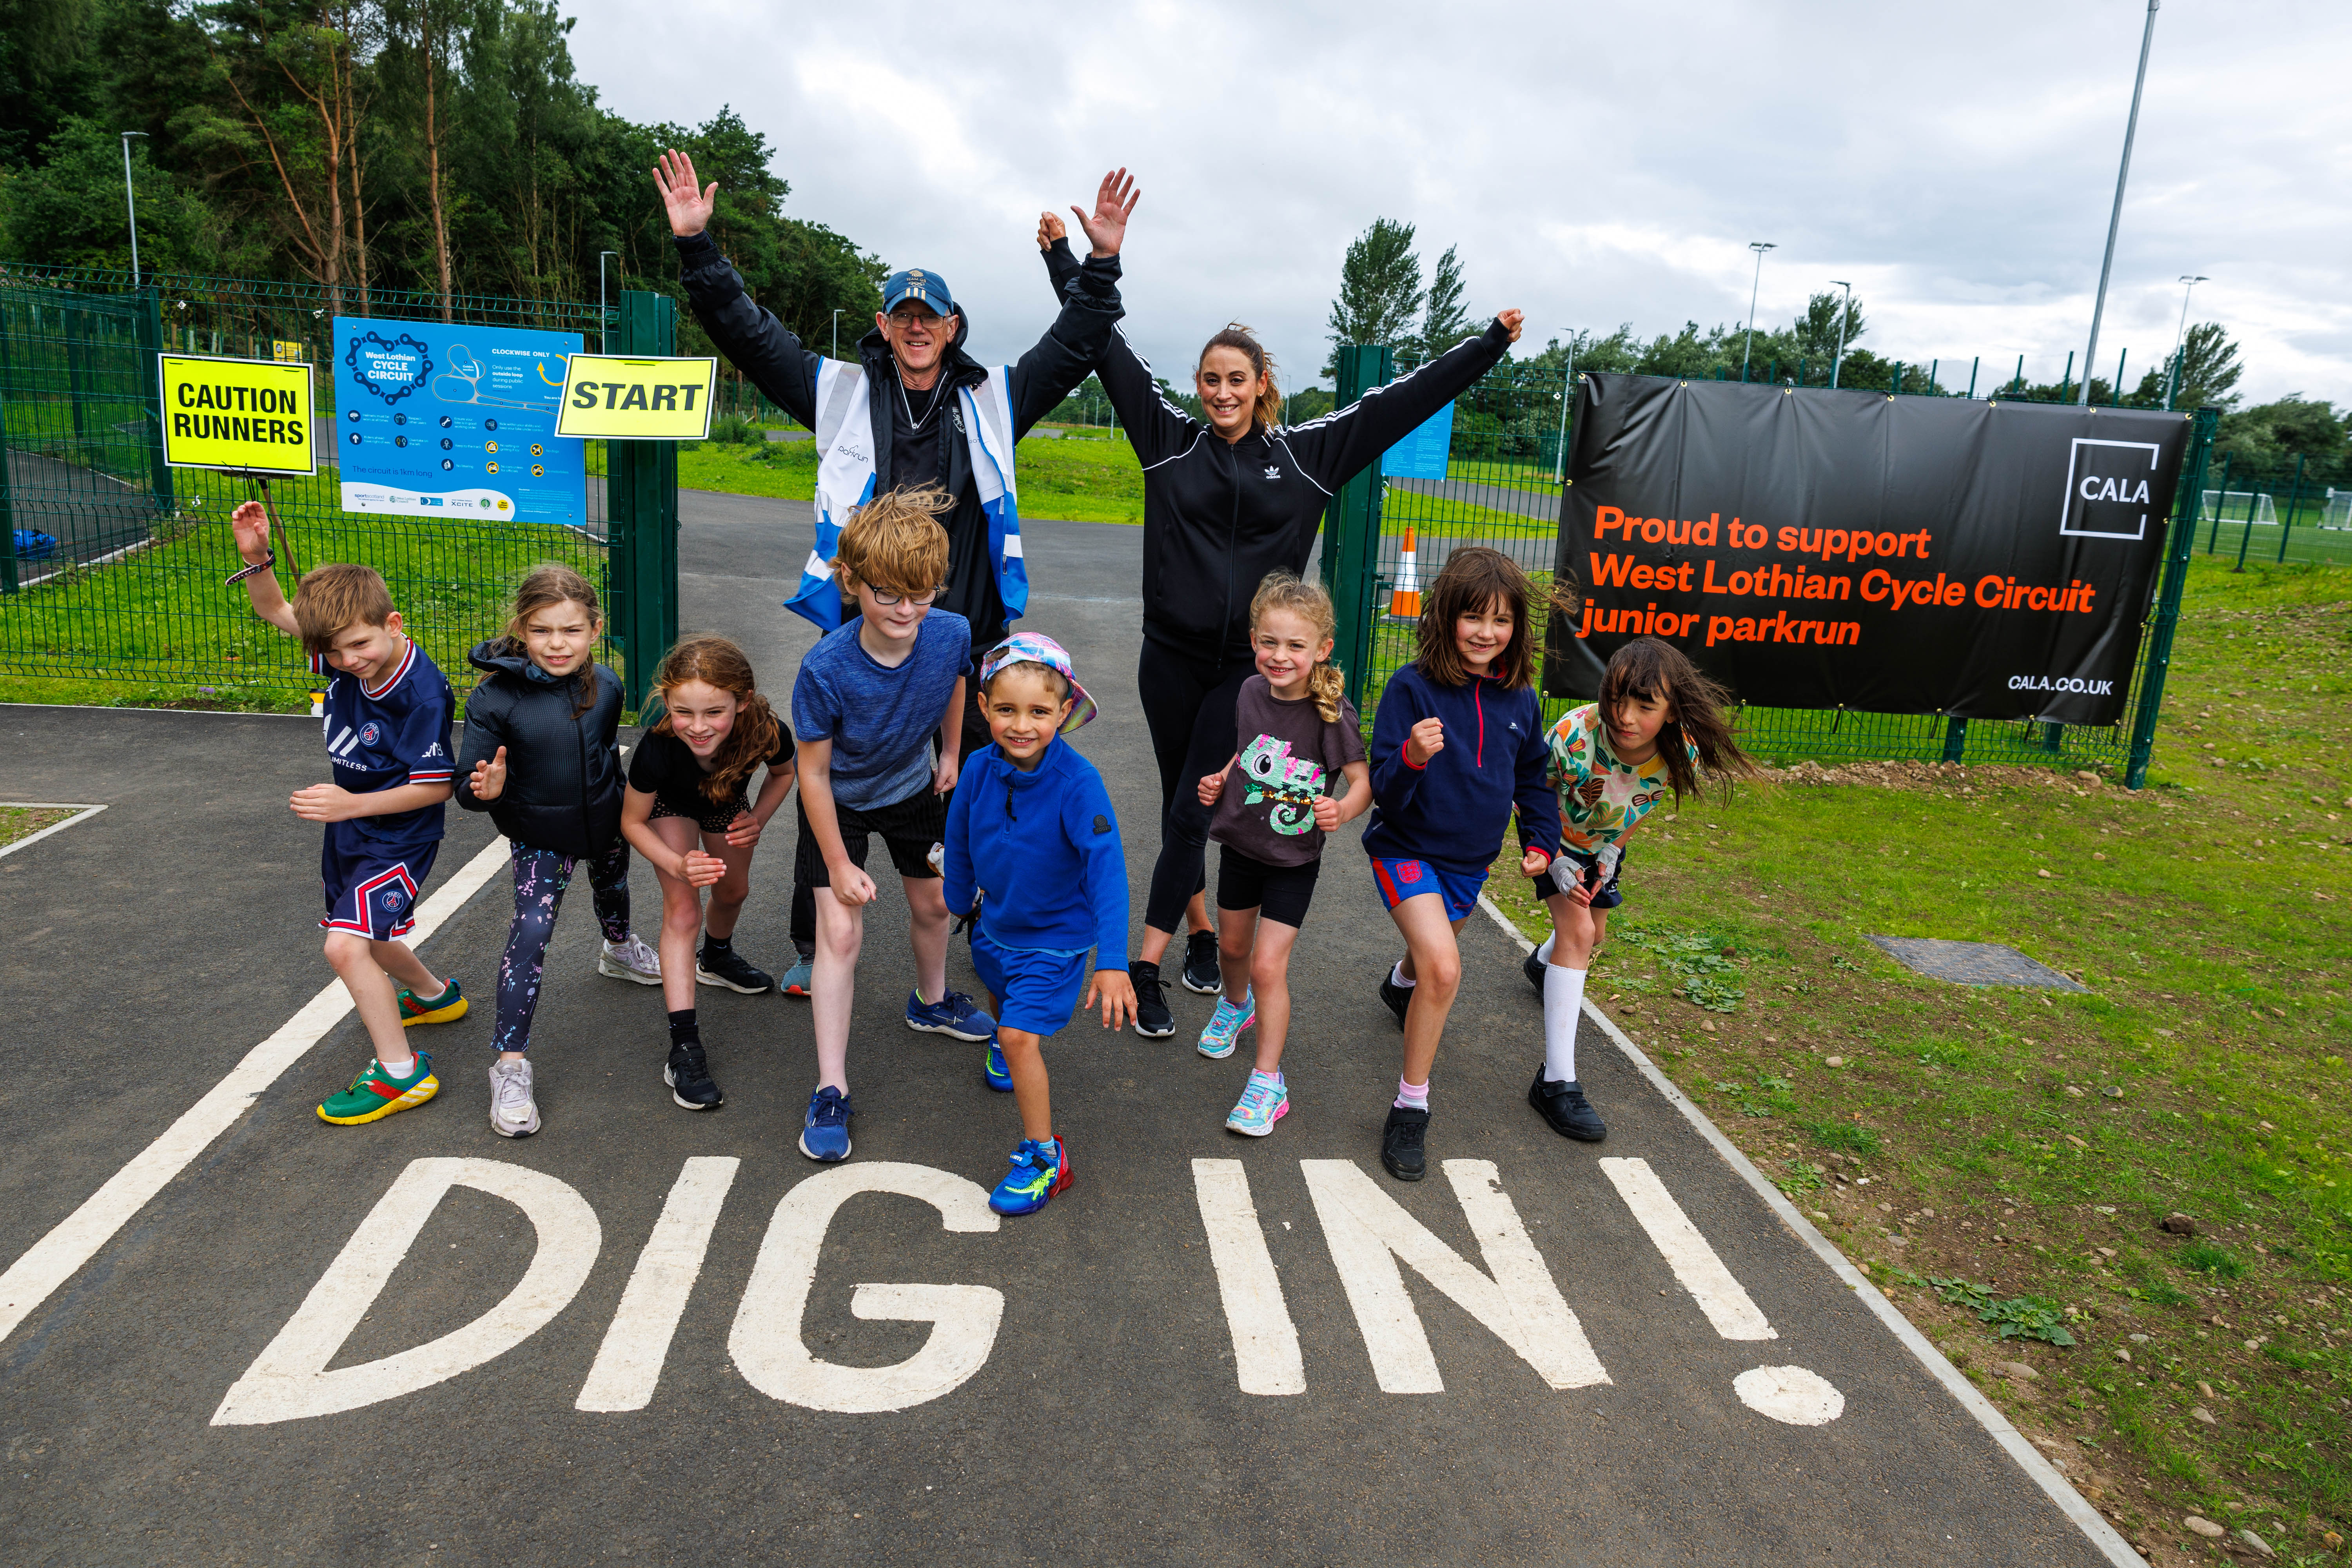 New junior Parkrun launched in Linlithgow thanks to Cala Homes support